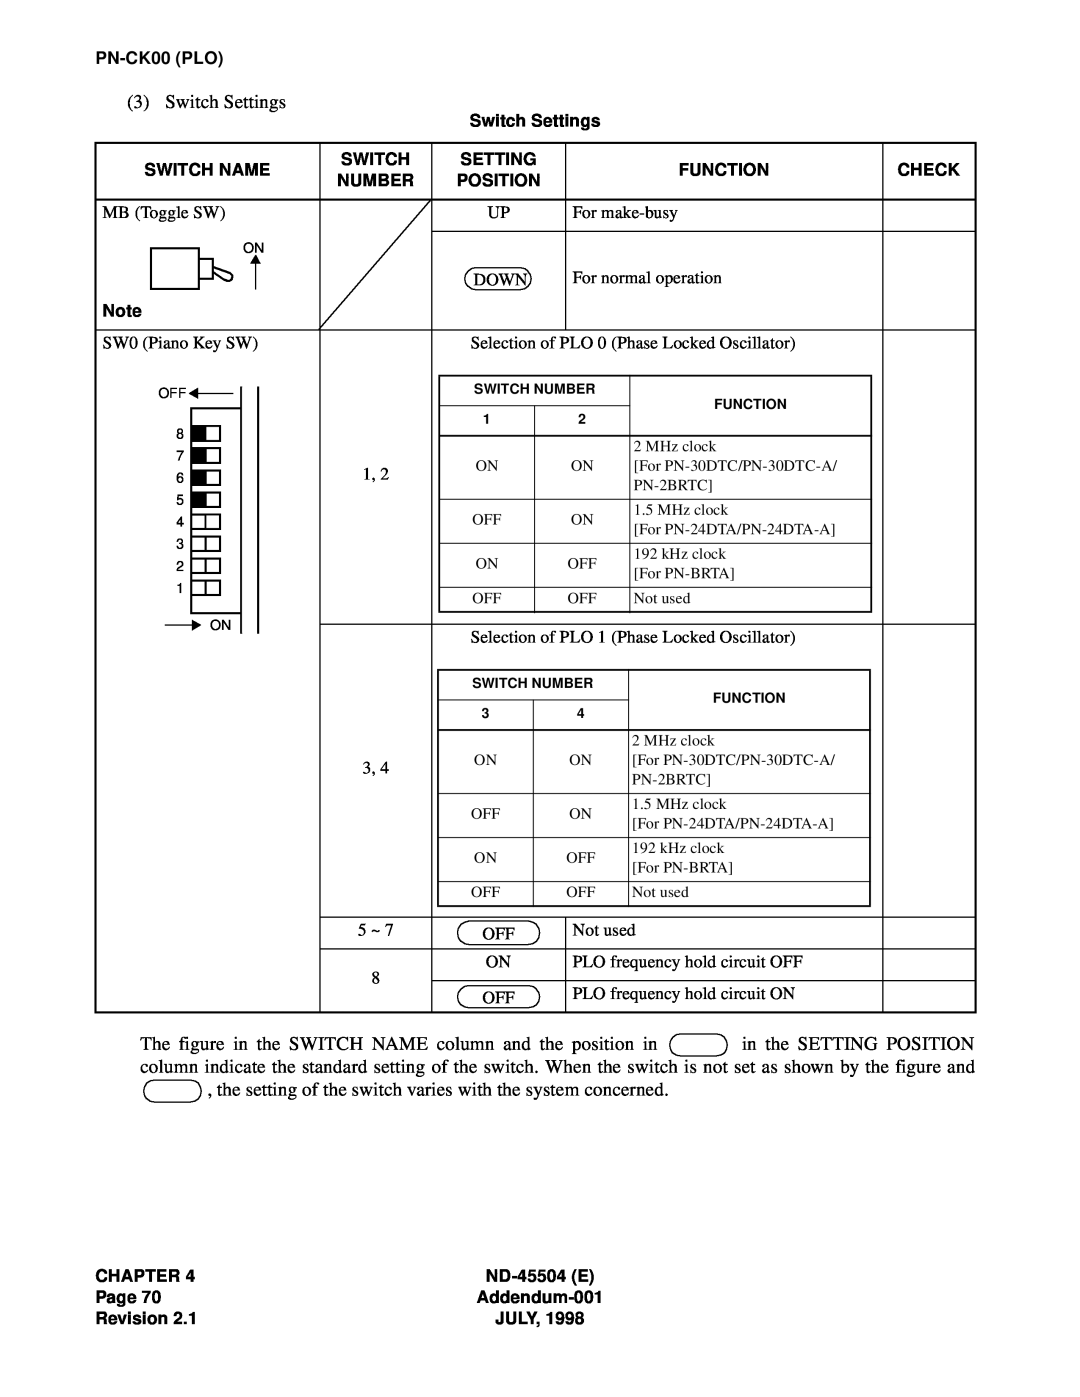 NEC 2000 IVS manual Switch Settings, MB Toggle SW 